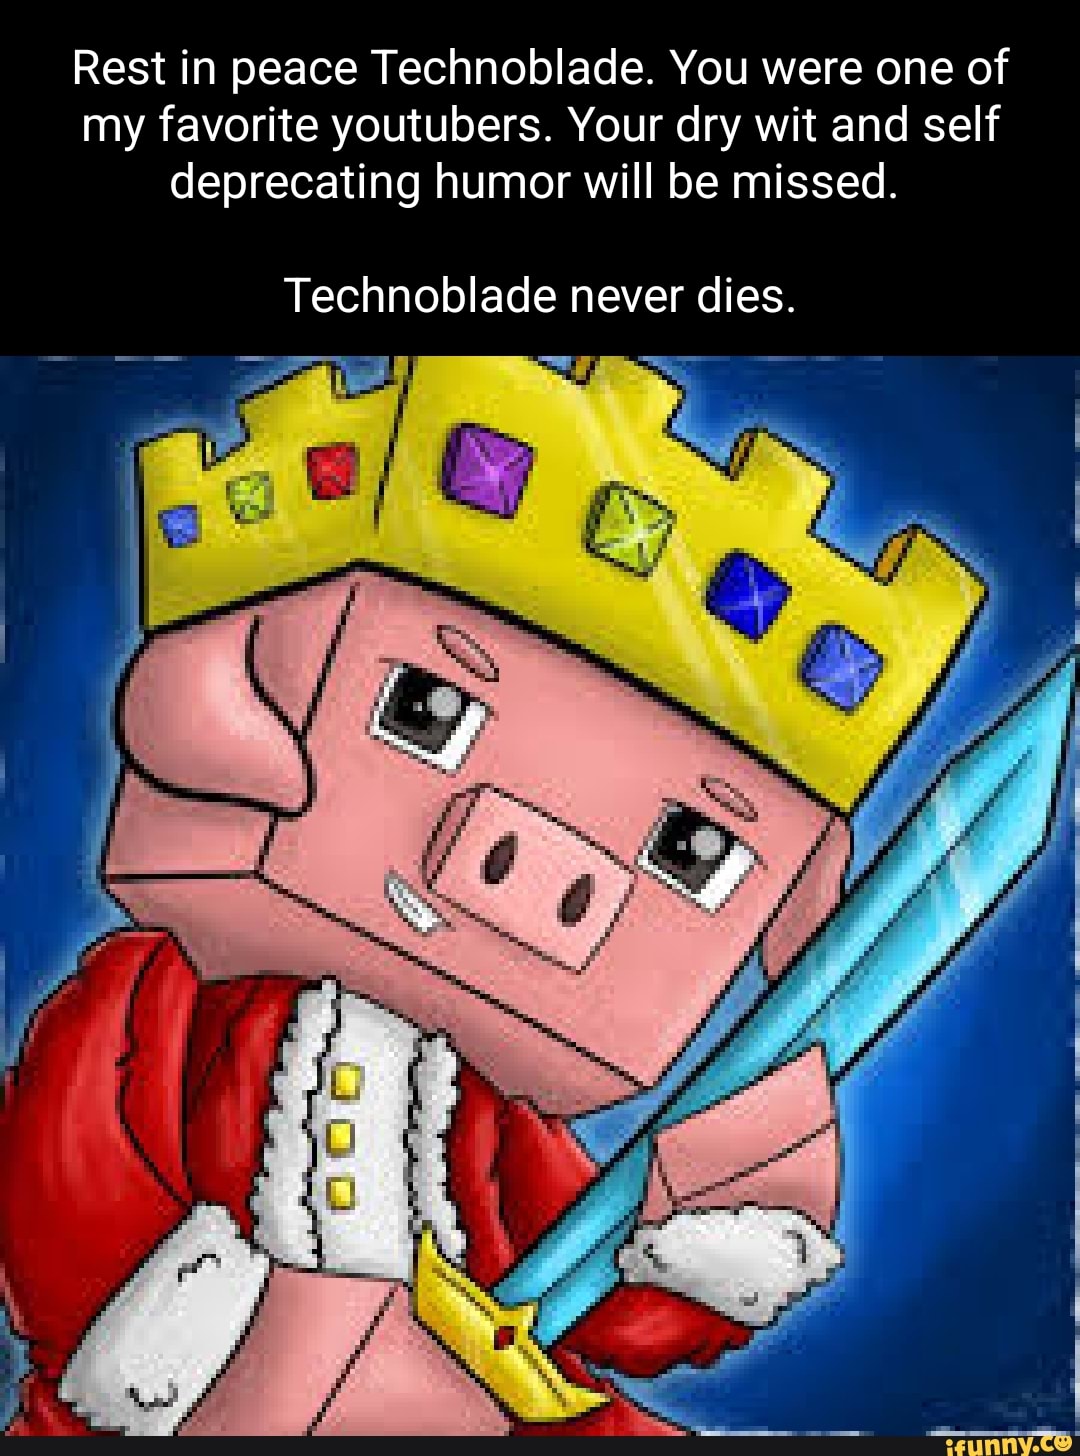 Rest In Peace Technoblade. (Please read)